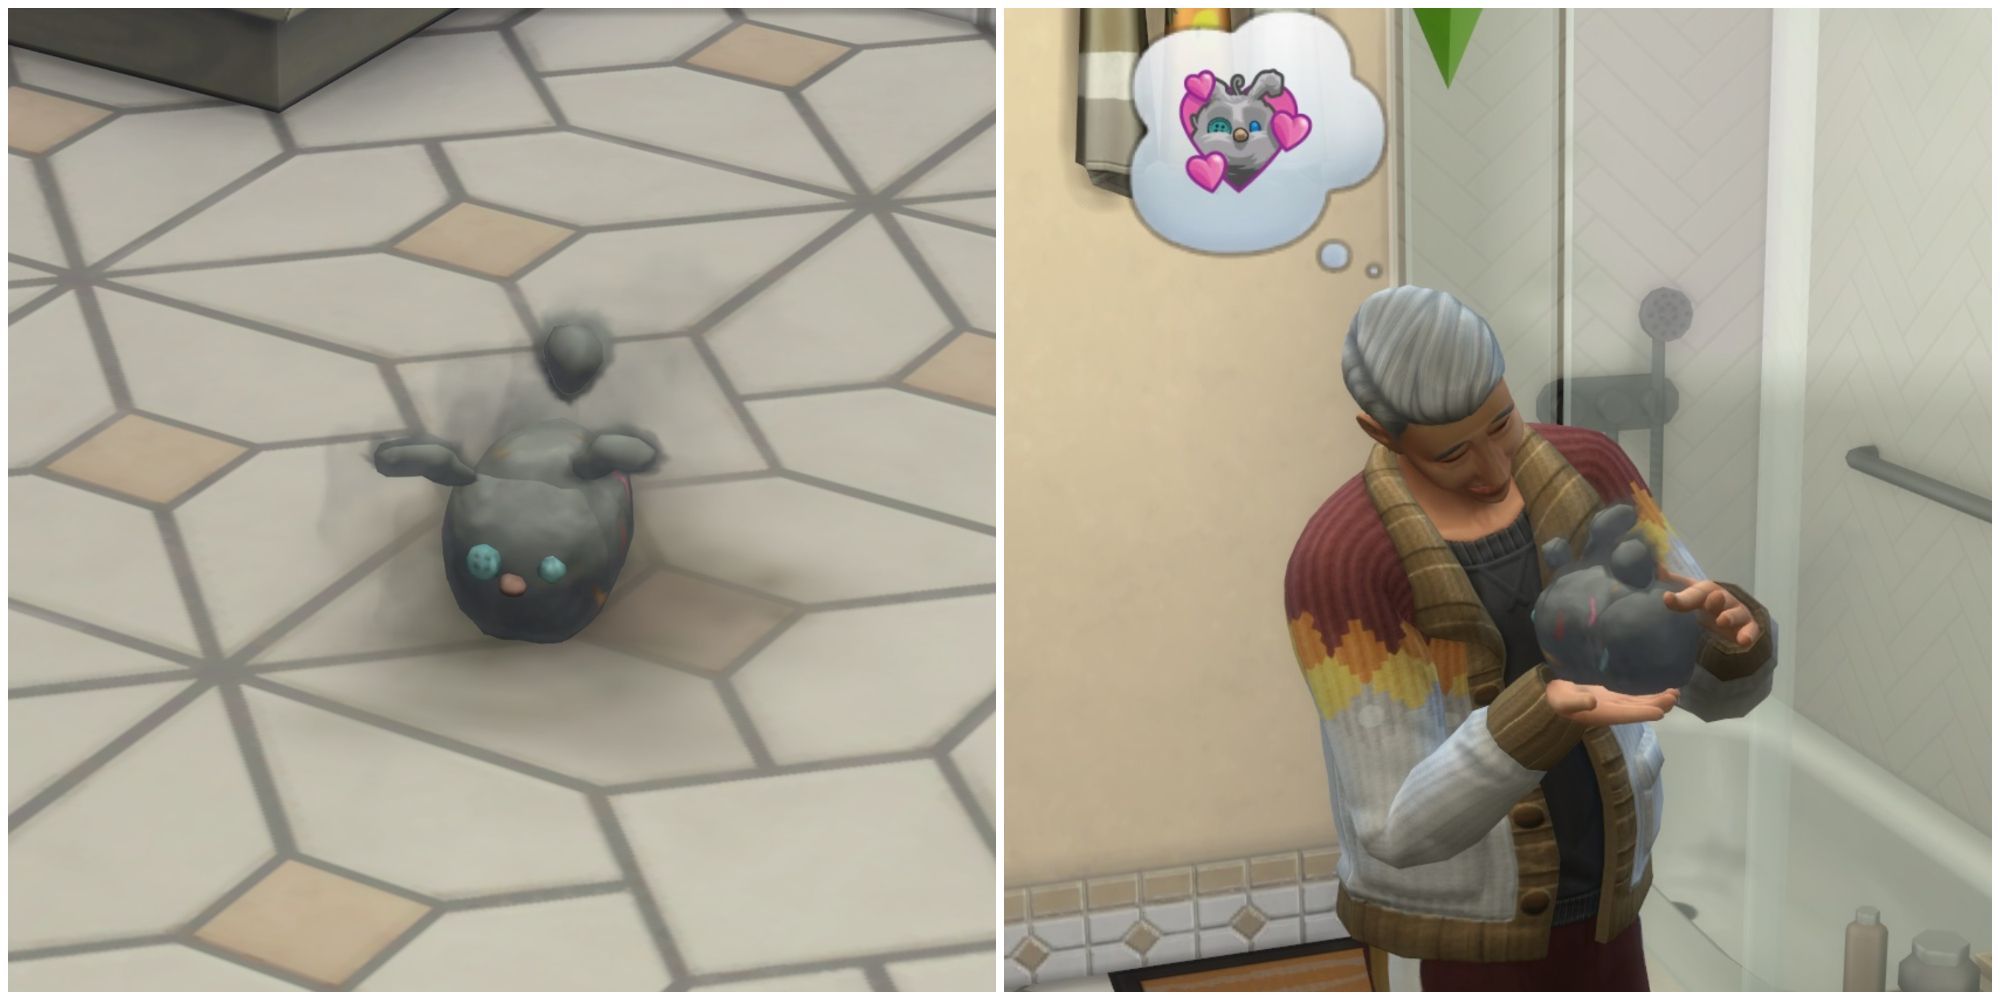 The Sims 4: How To Make Money With Dust Bunnies